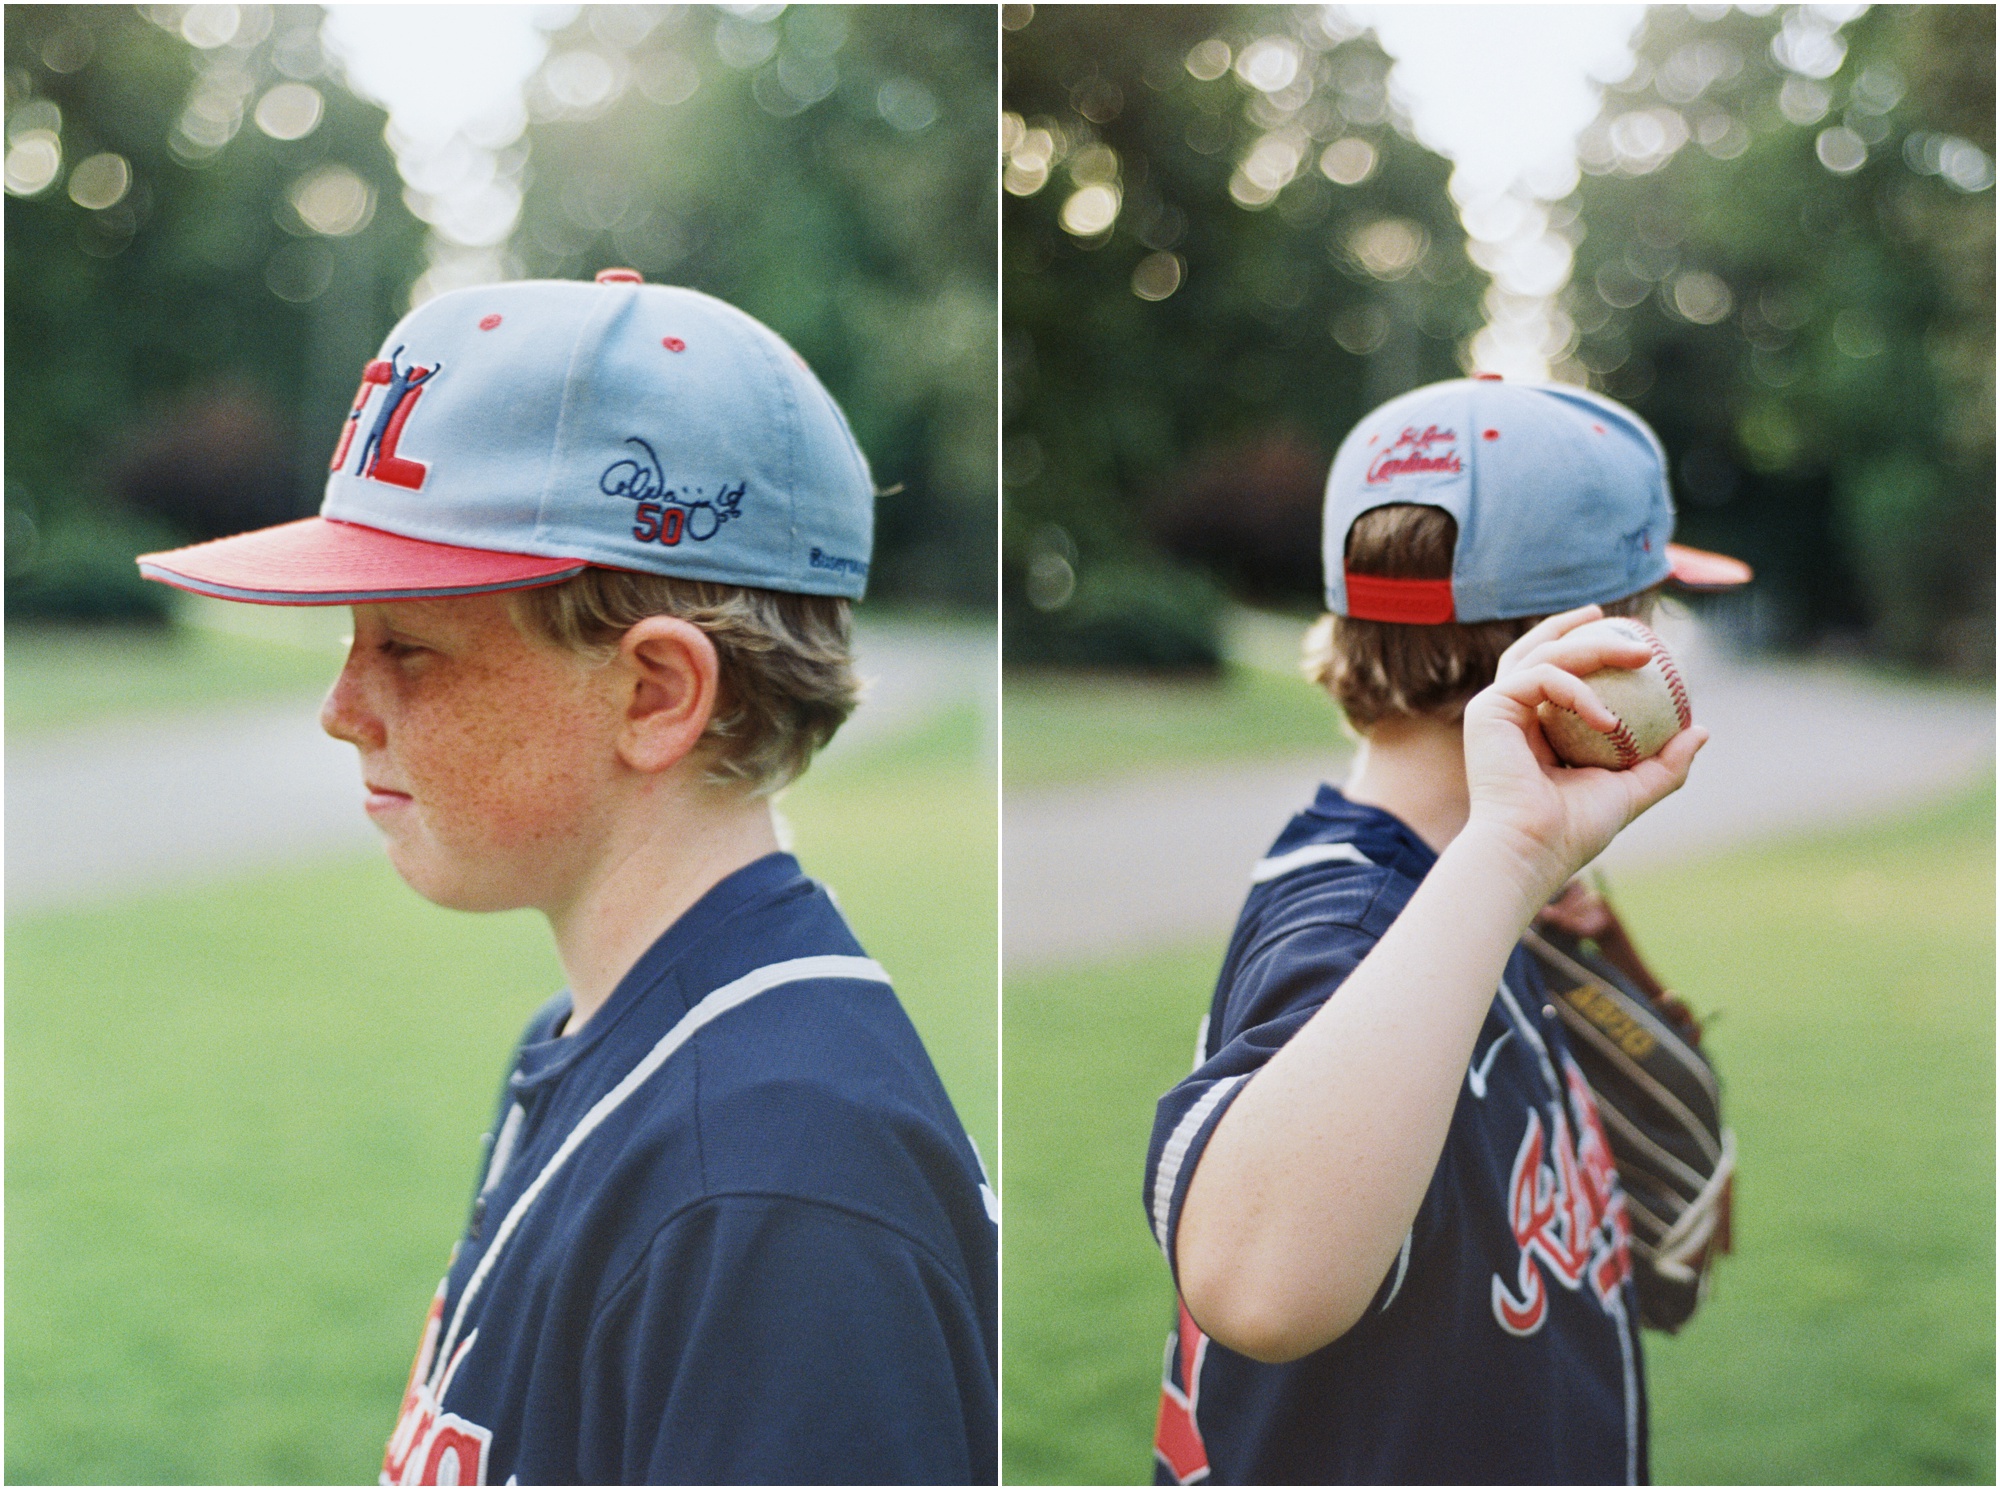 Portraits of a young boy in a baseball cap on film.